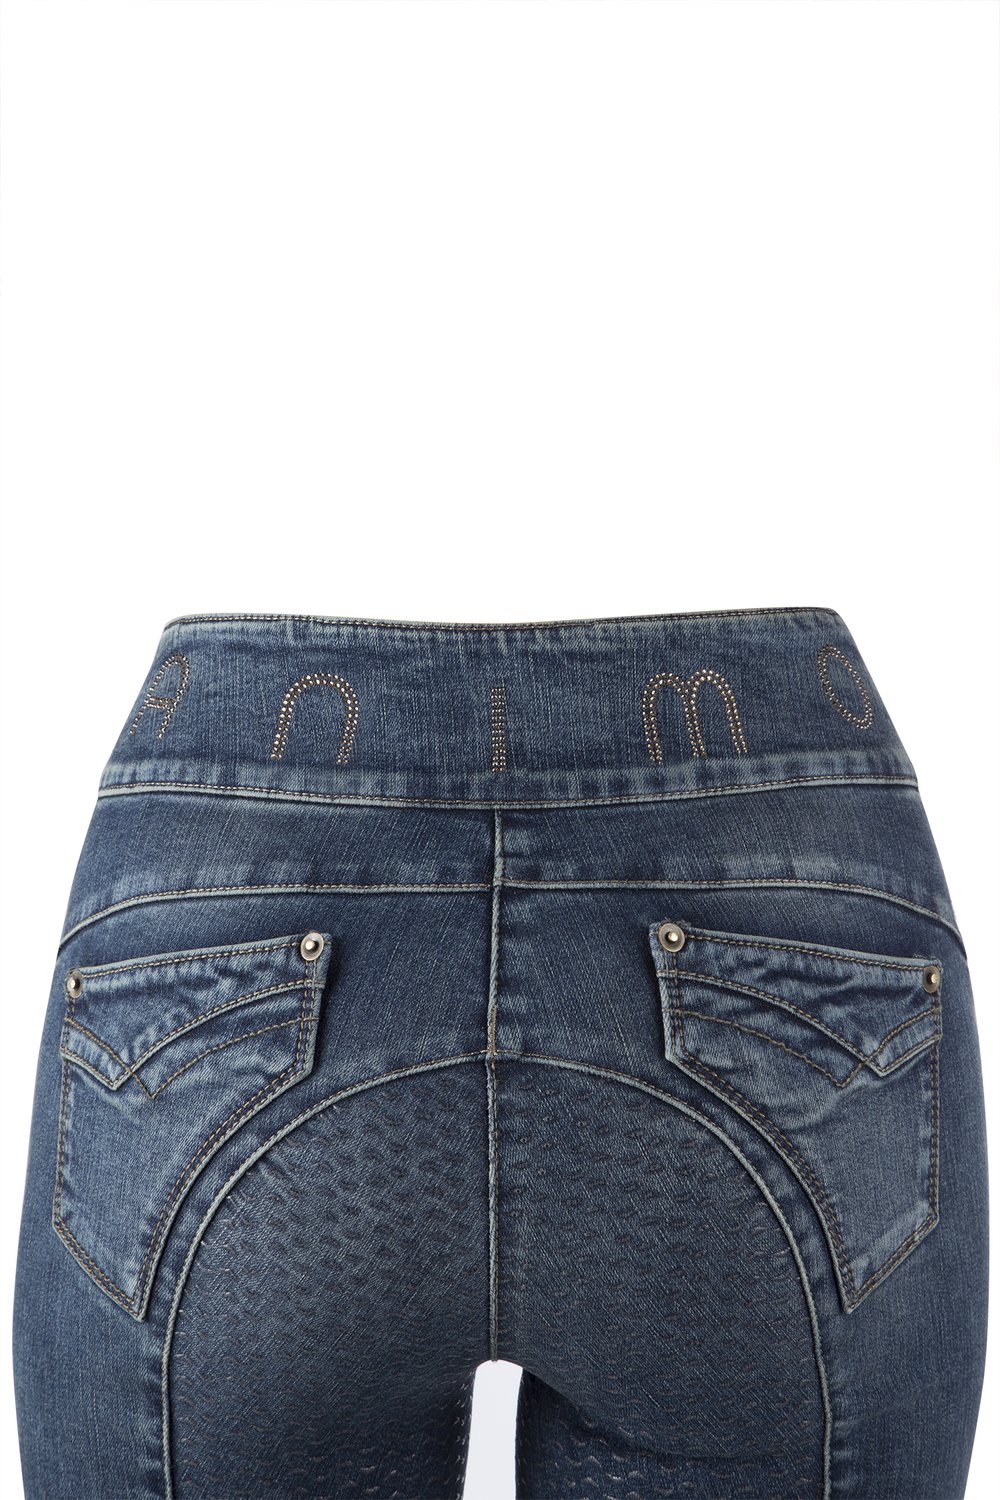 Jeans fullgrip ridebukse - Roxette and